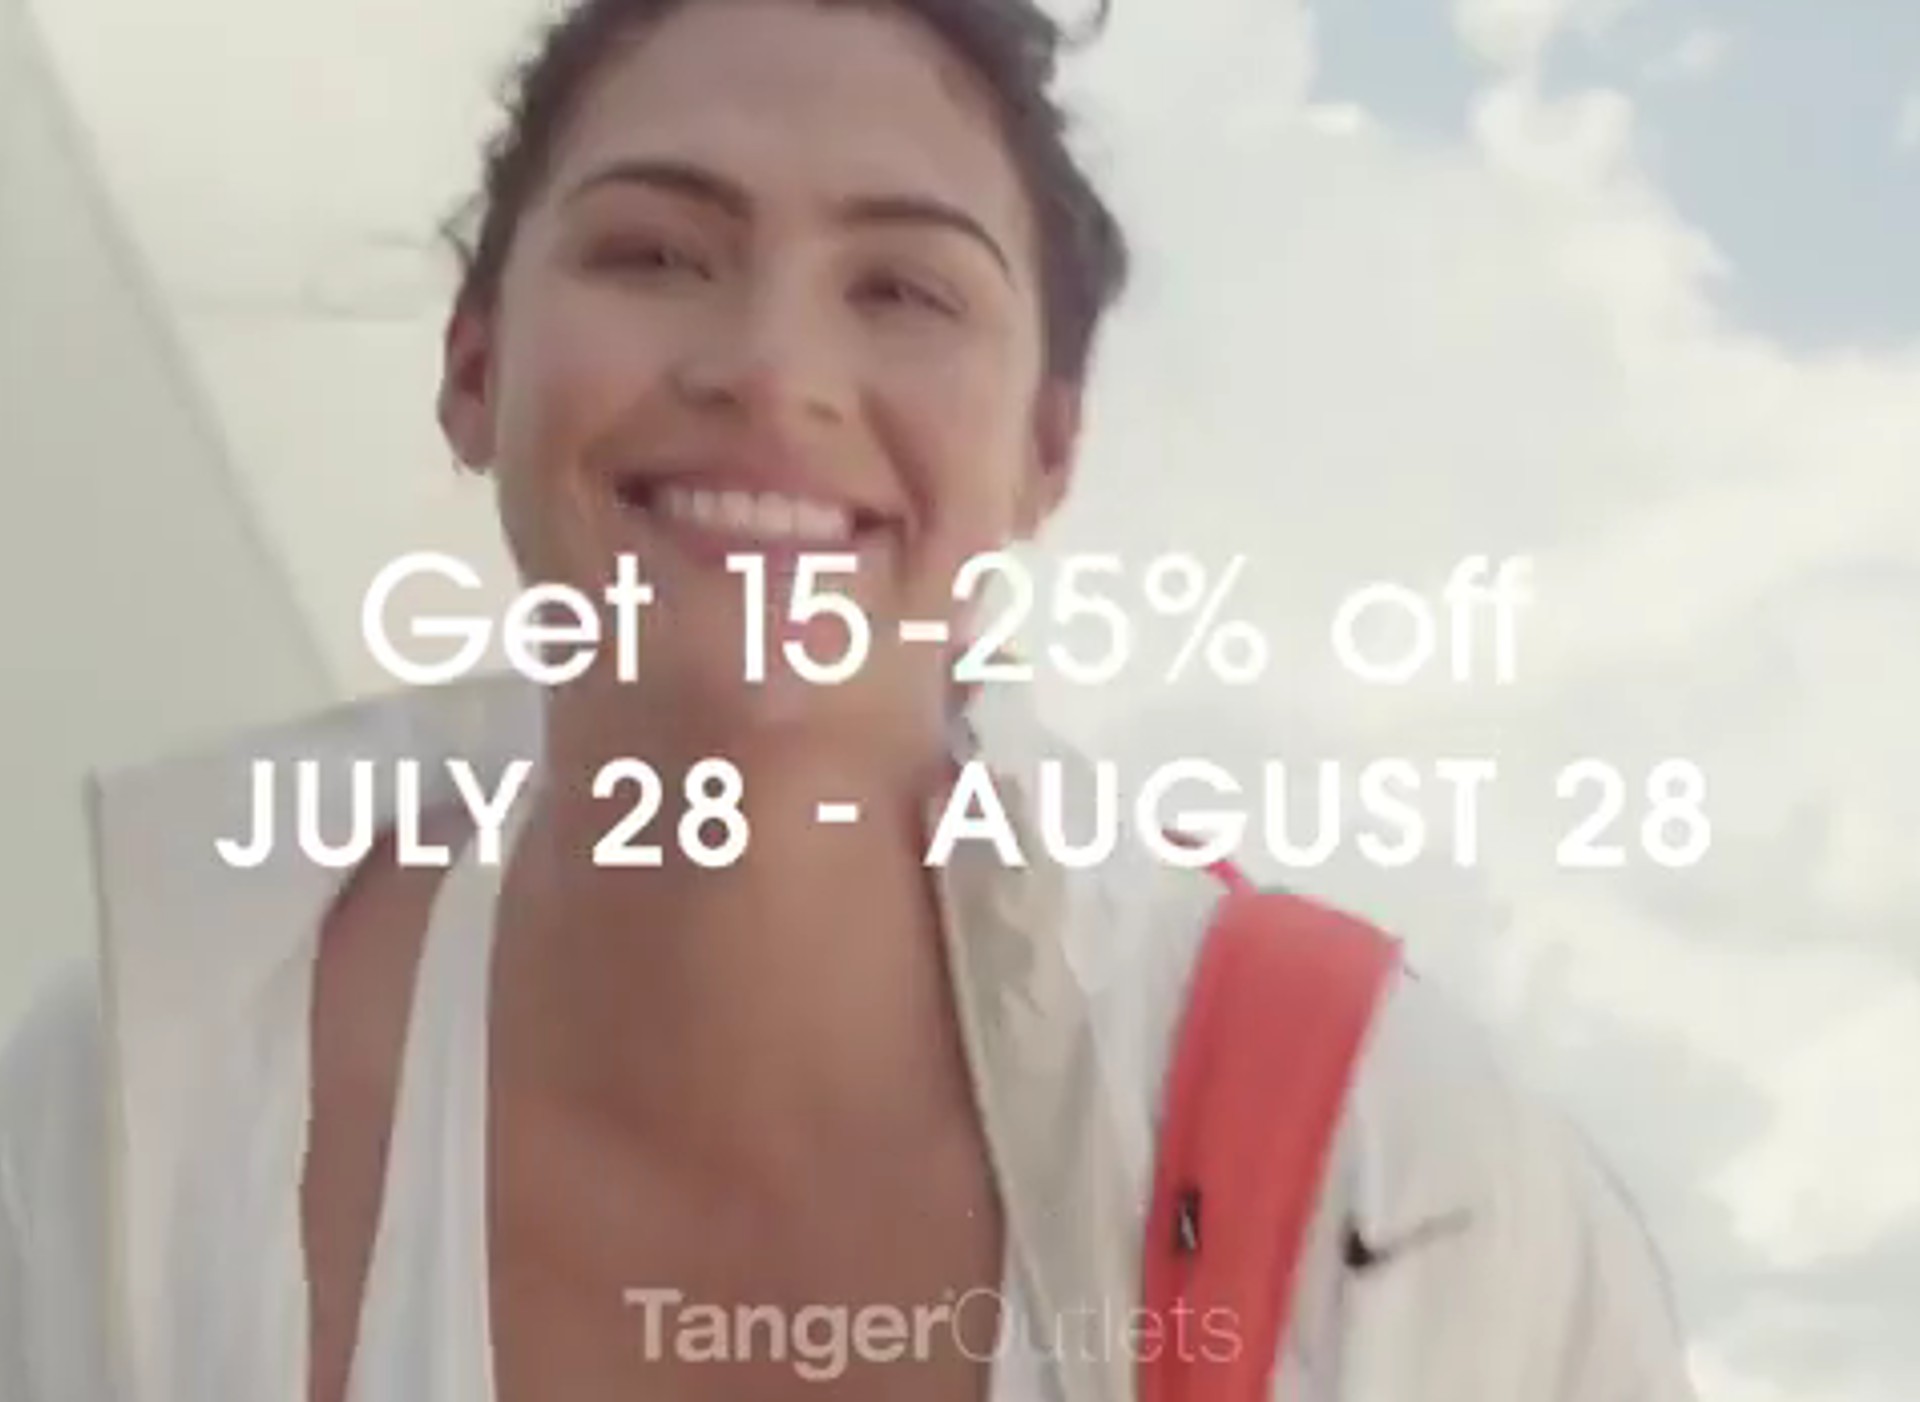 Play Video: Kick-off back-to-school with the best deals of the season during TangerStyle Spring!